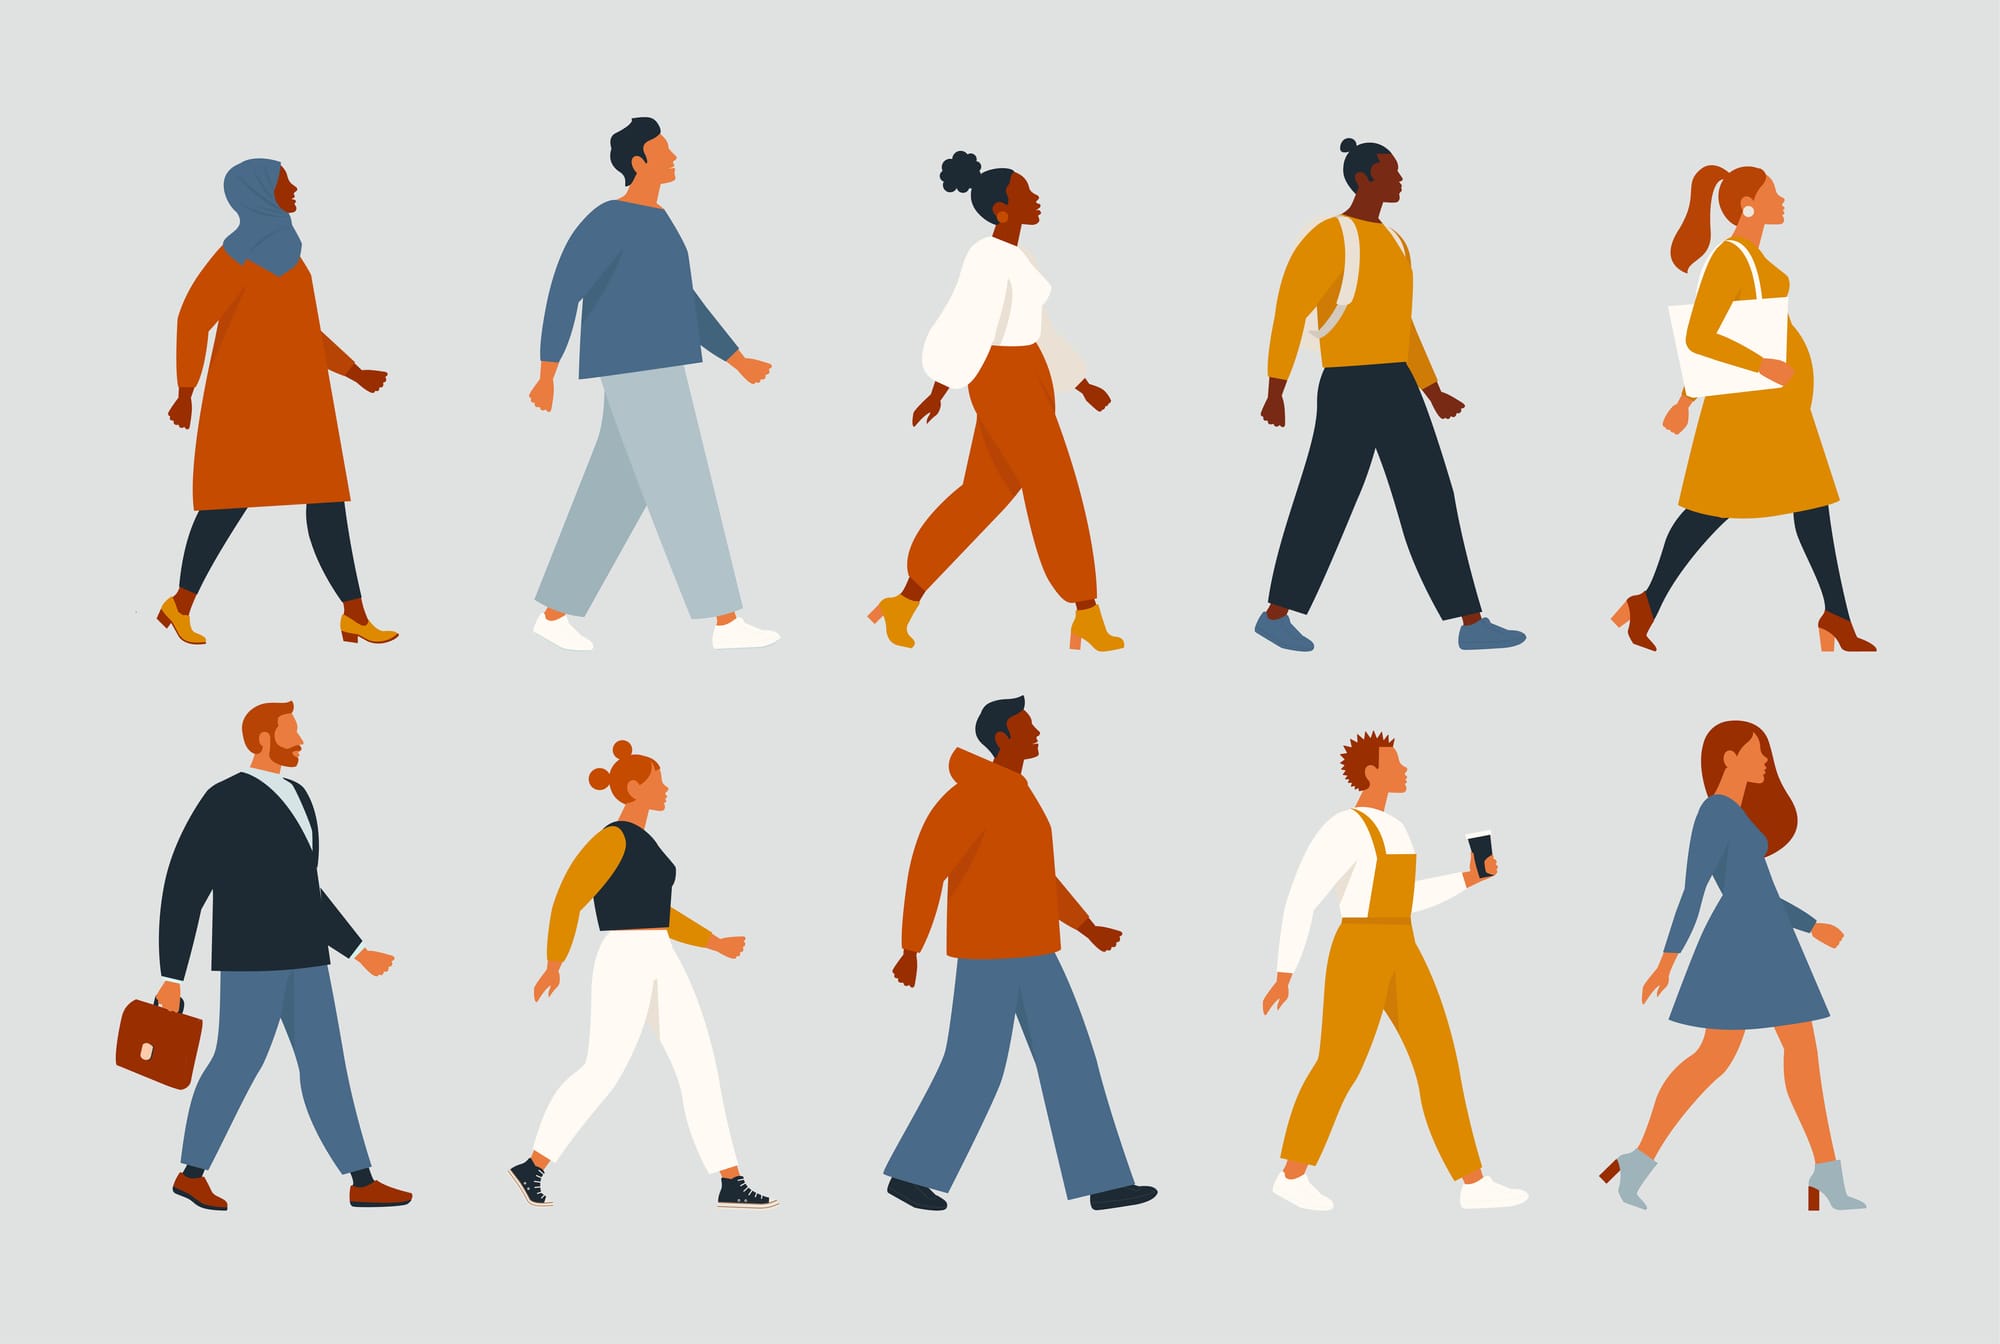 Illustration of ethnically diverse people walking in the same direction.  